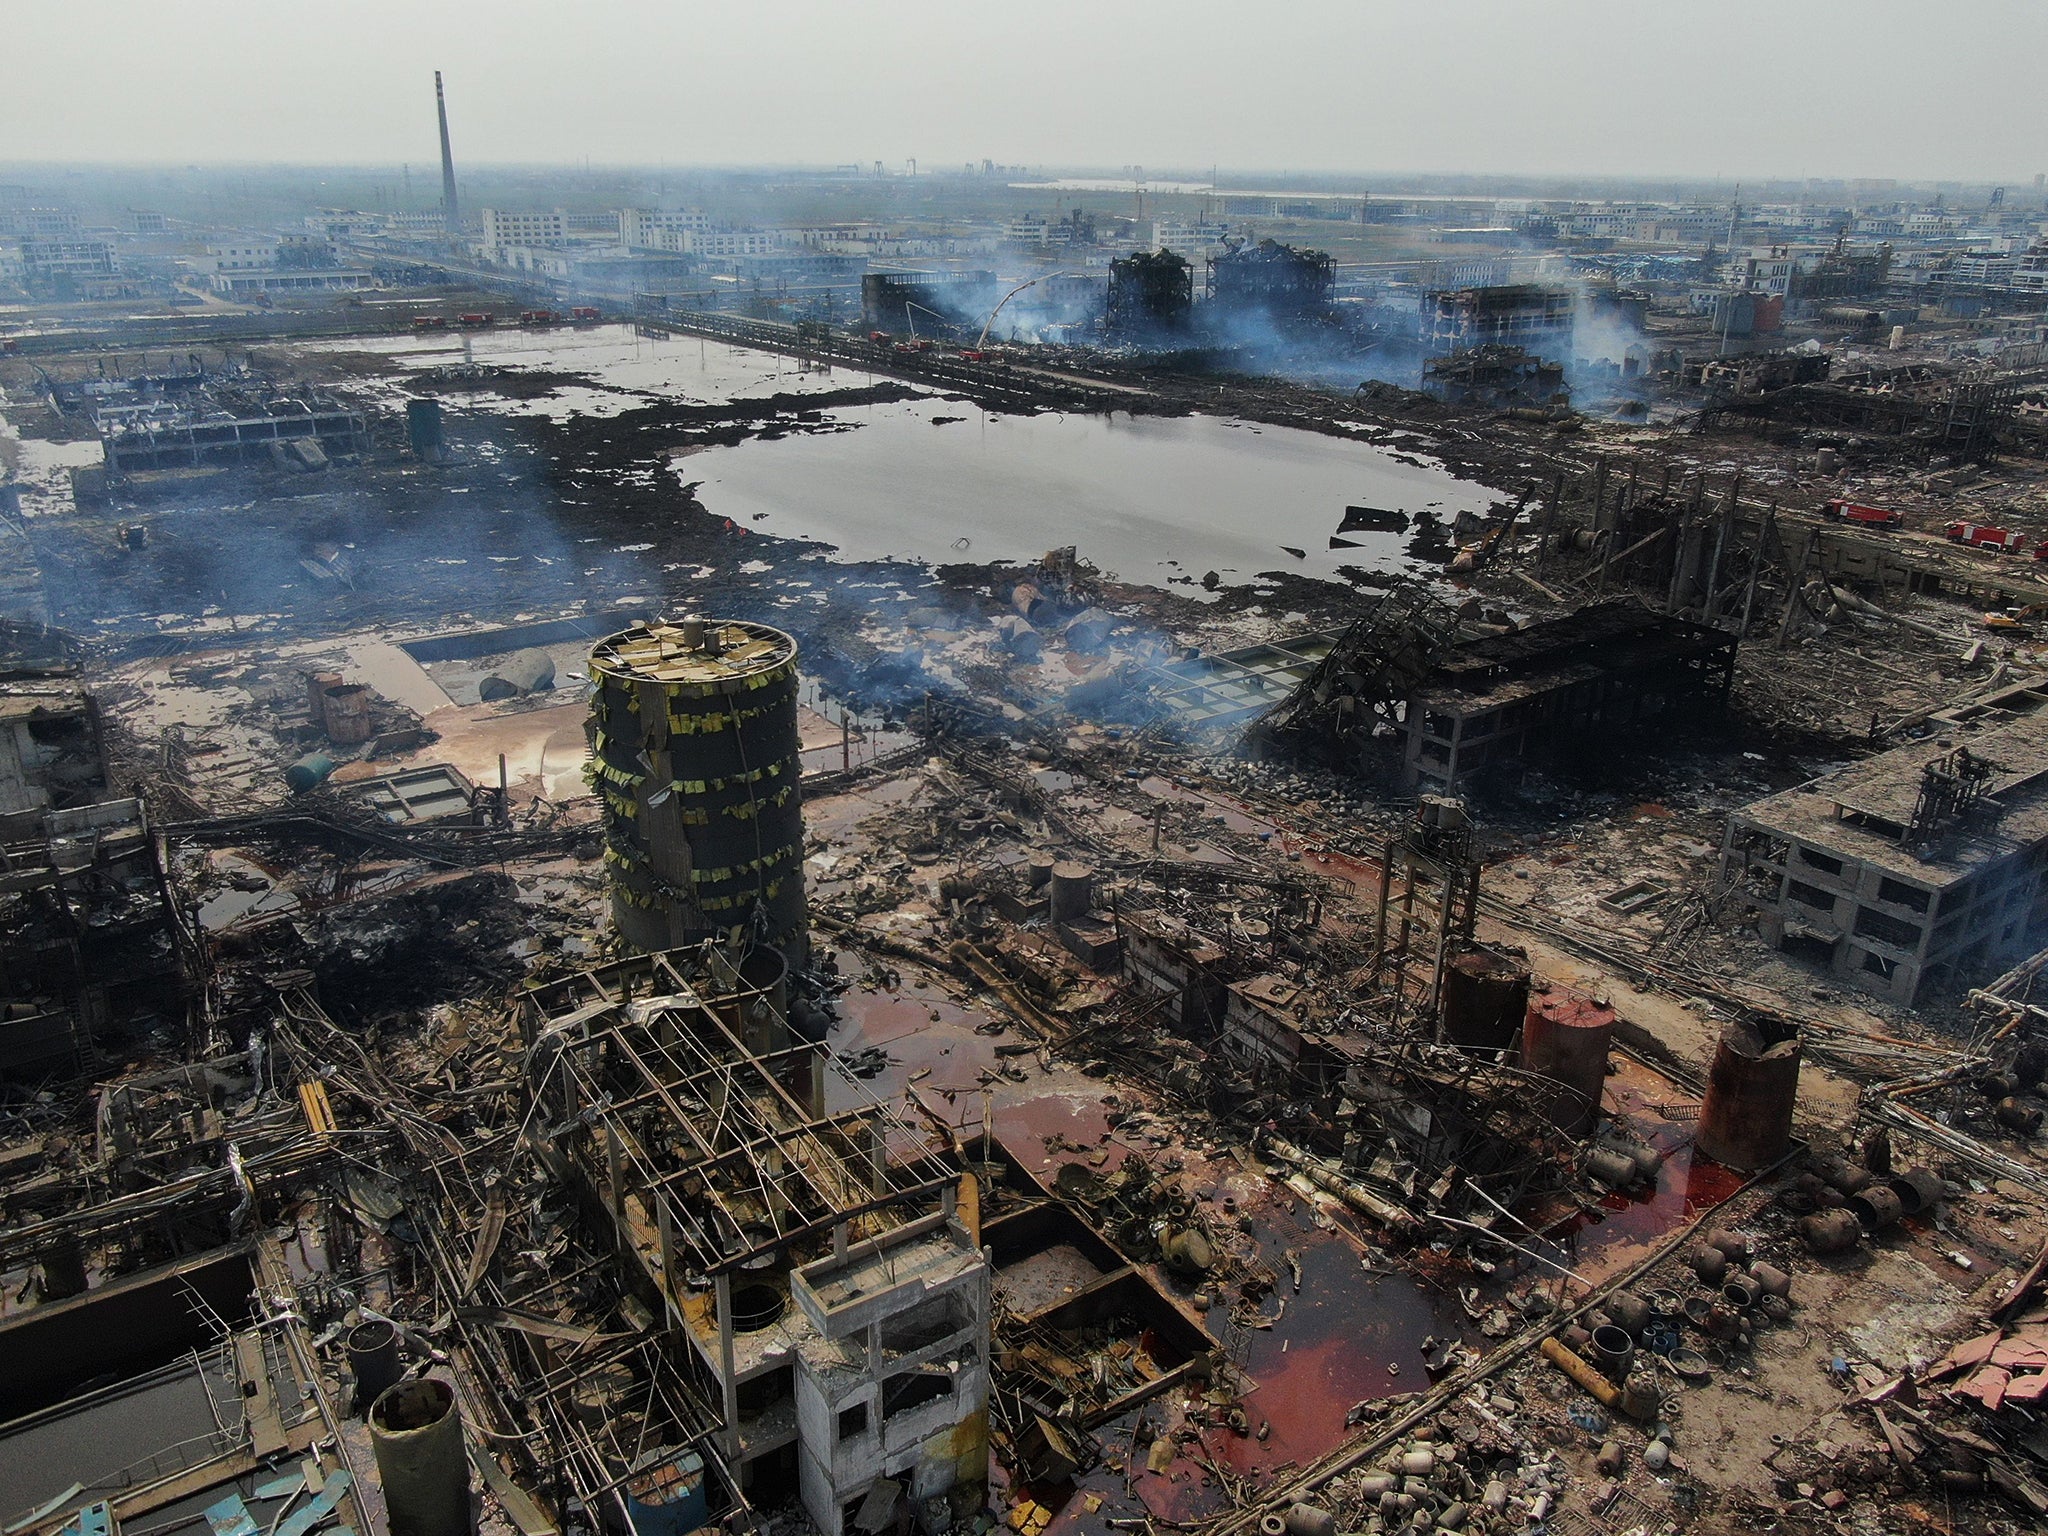 The death toll of a chemical plant explosion in Yancheng rose to 78 at the end of March